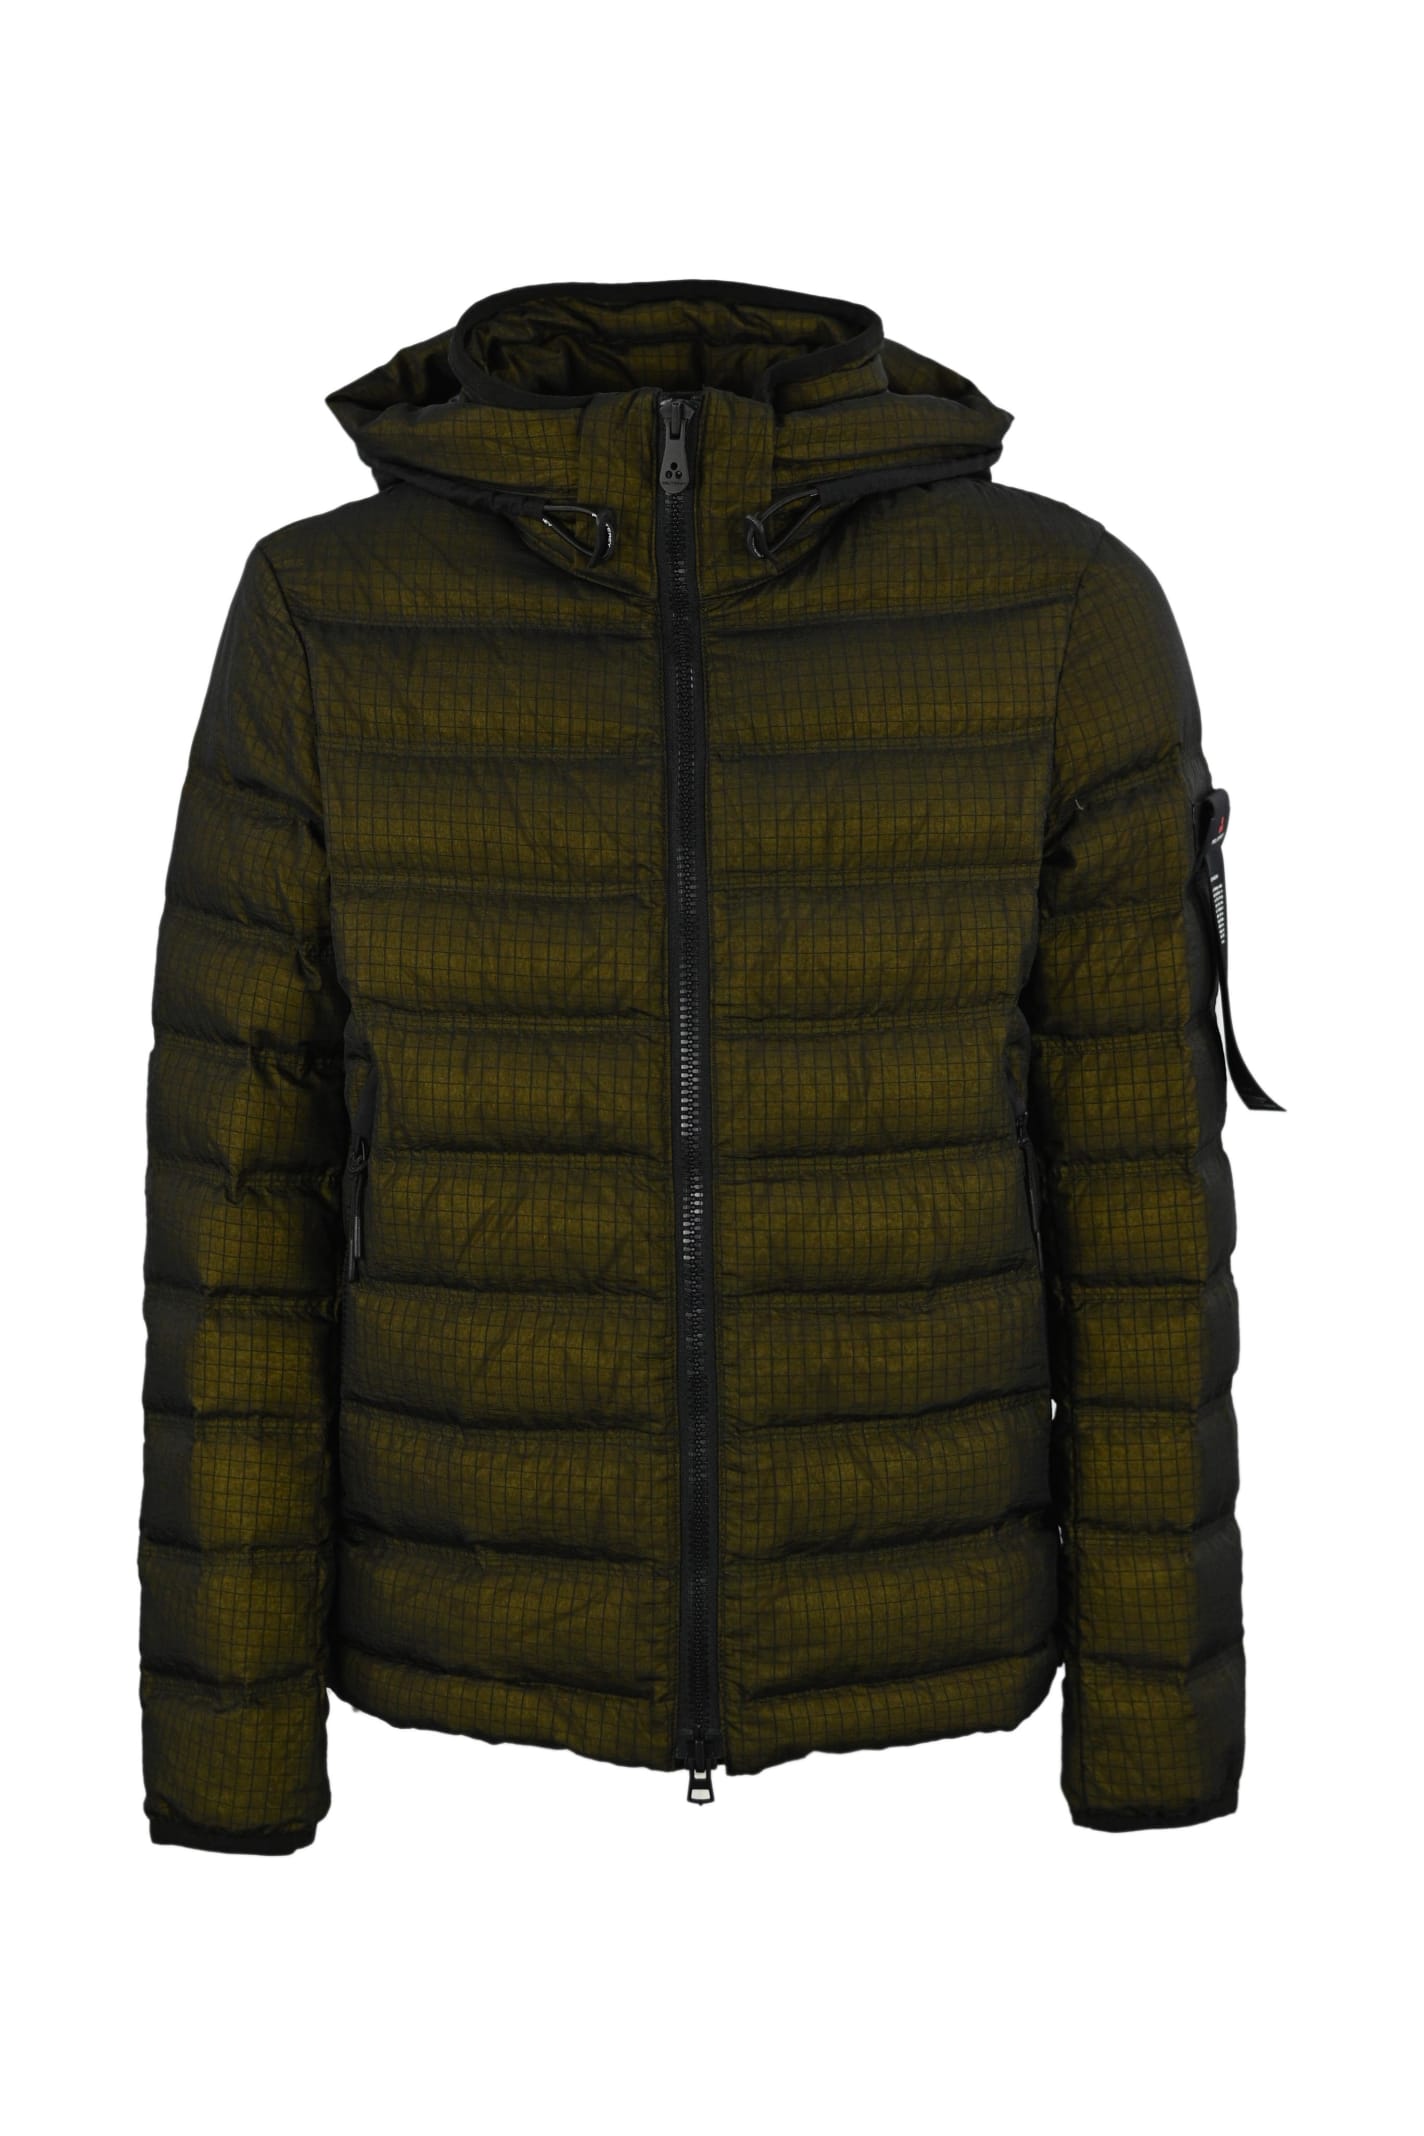 Peuterey Super Lightweight And Semi-gloss Quilted Down Jacket